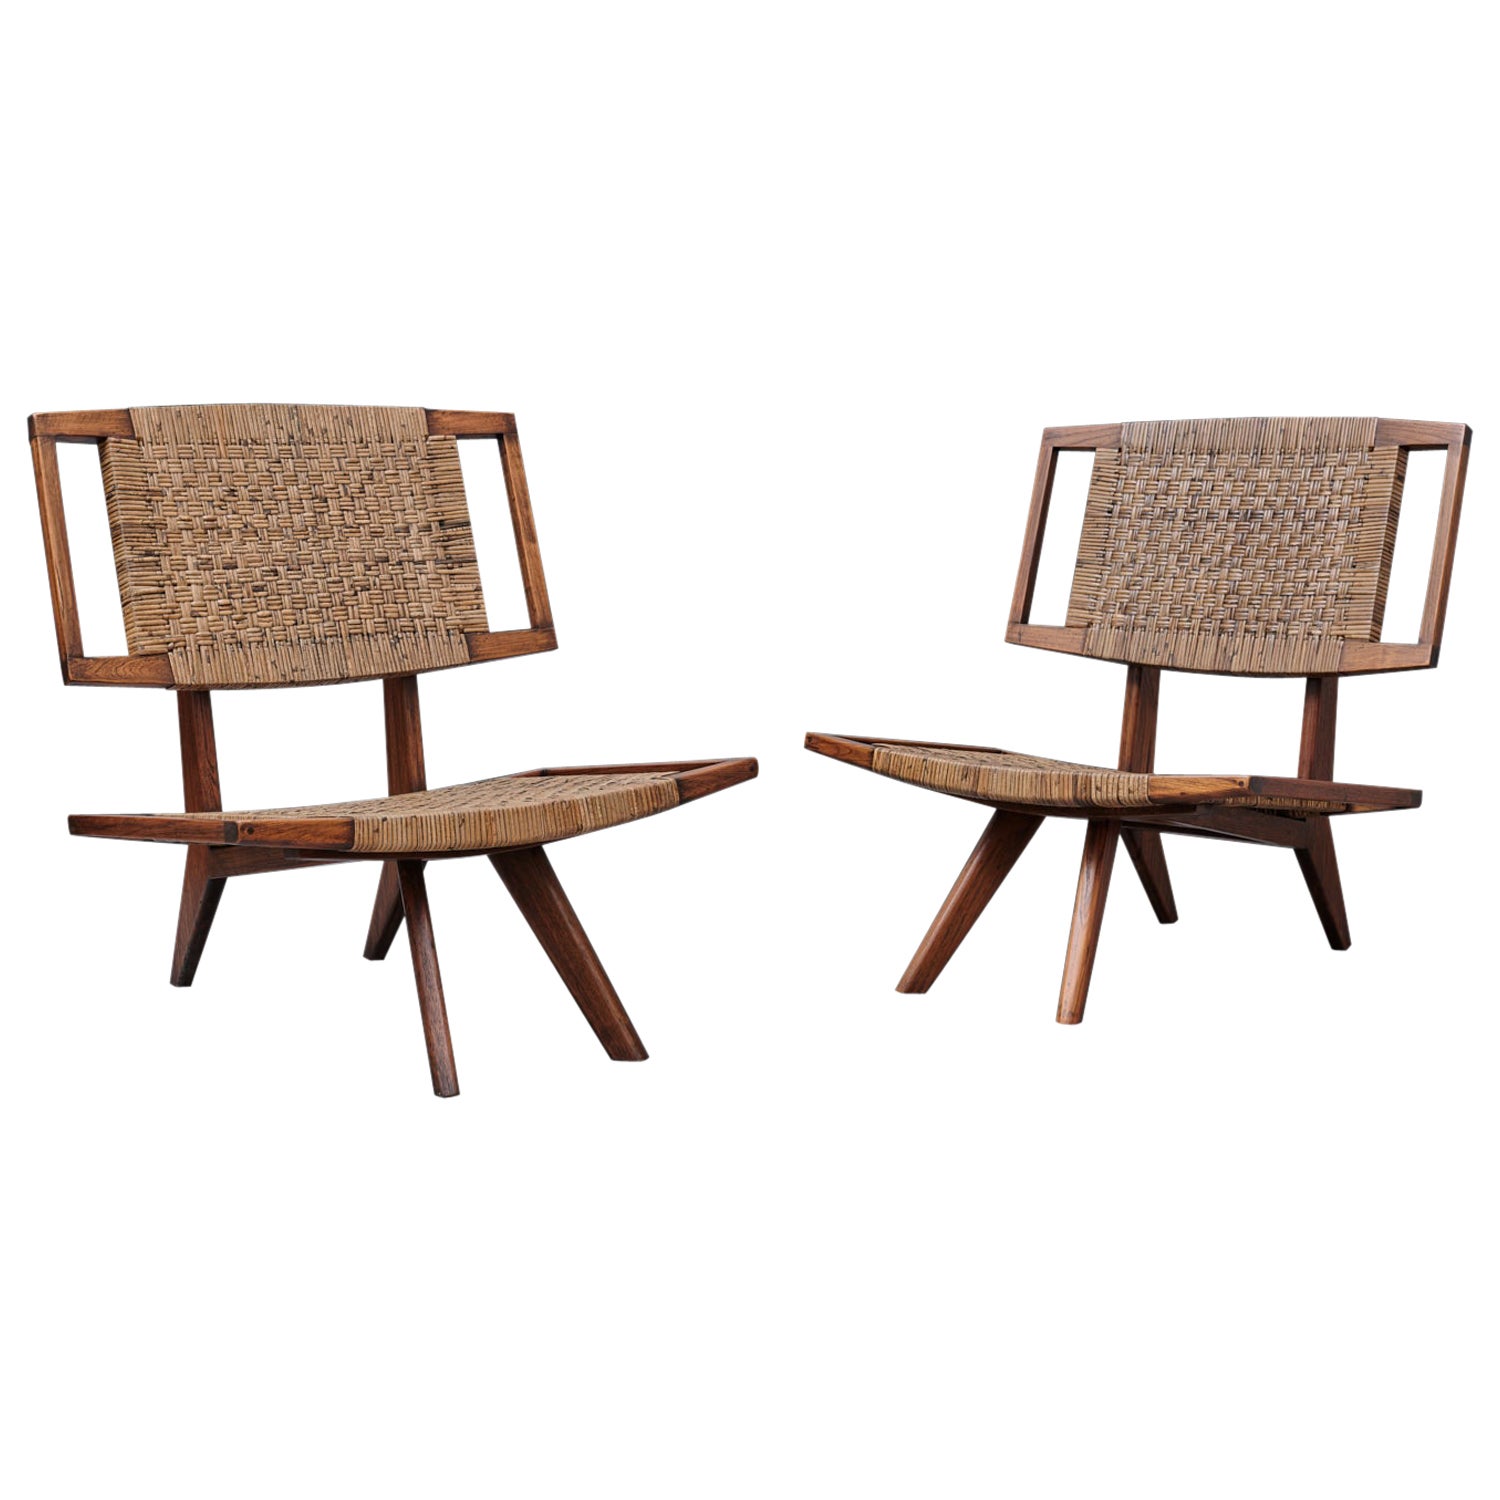 Mid Century Rattan Lounge chairs attr. to Paul László for Glenn of California